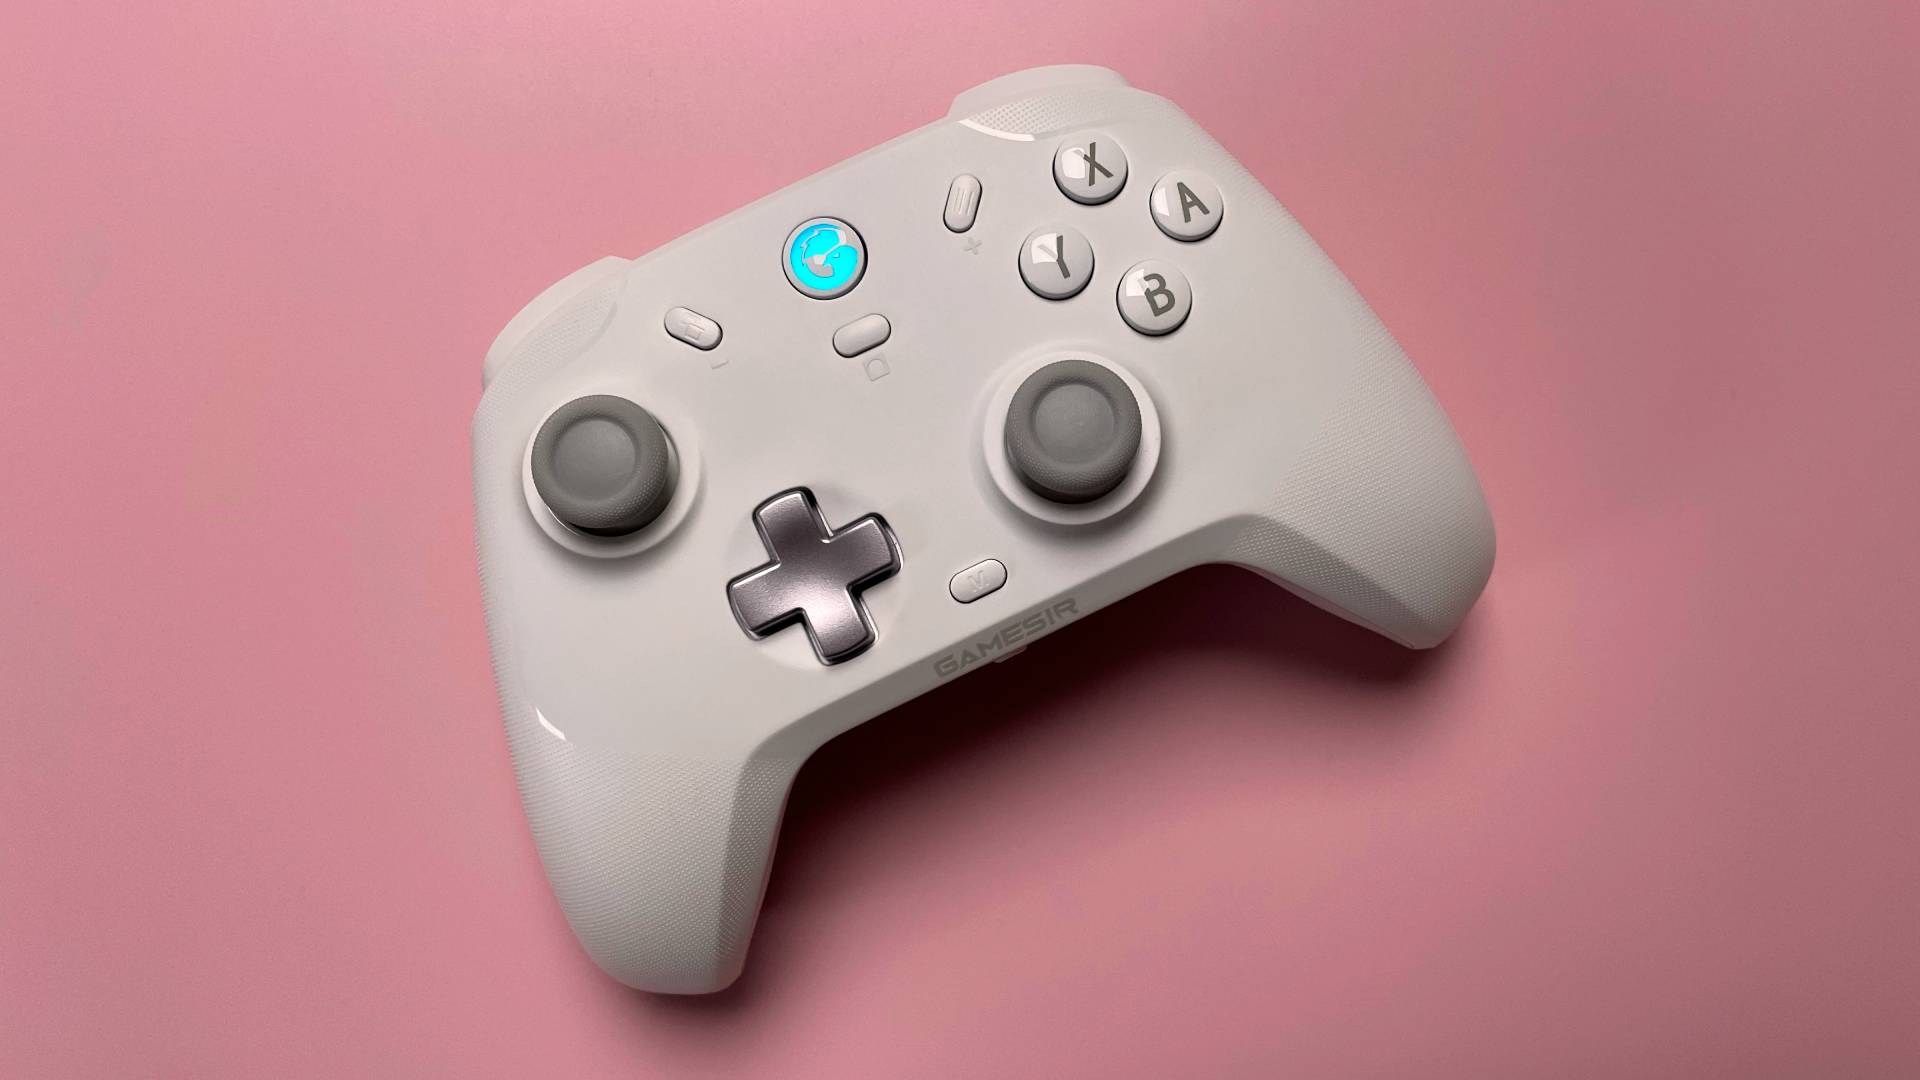 The GameSir T4 Cyclone game controller for iOS and macOS against a pink background.